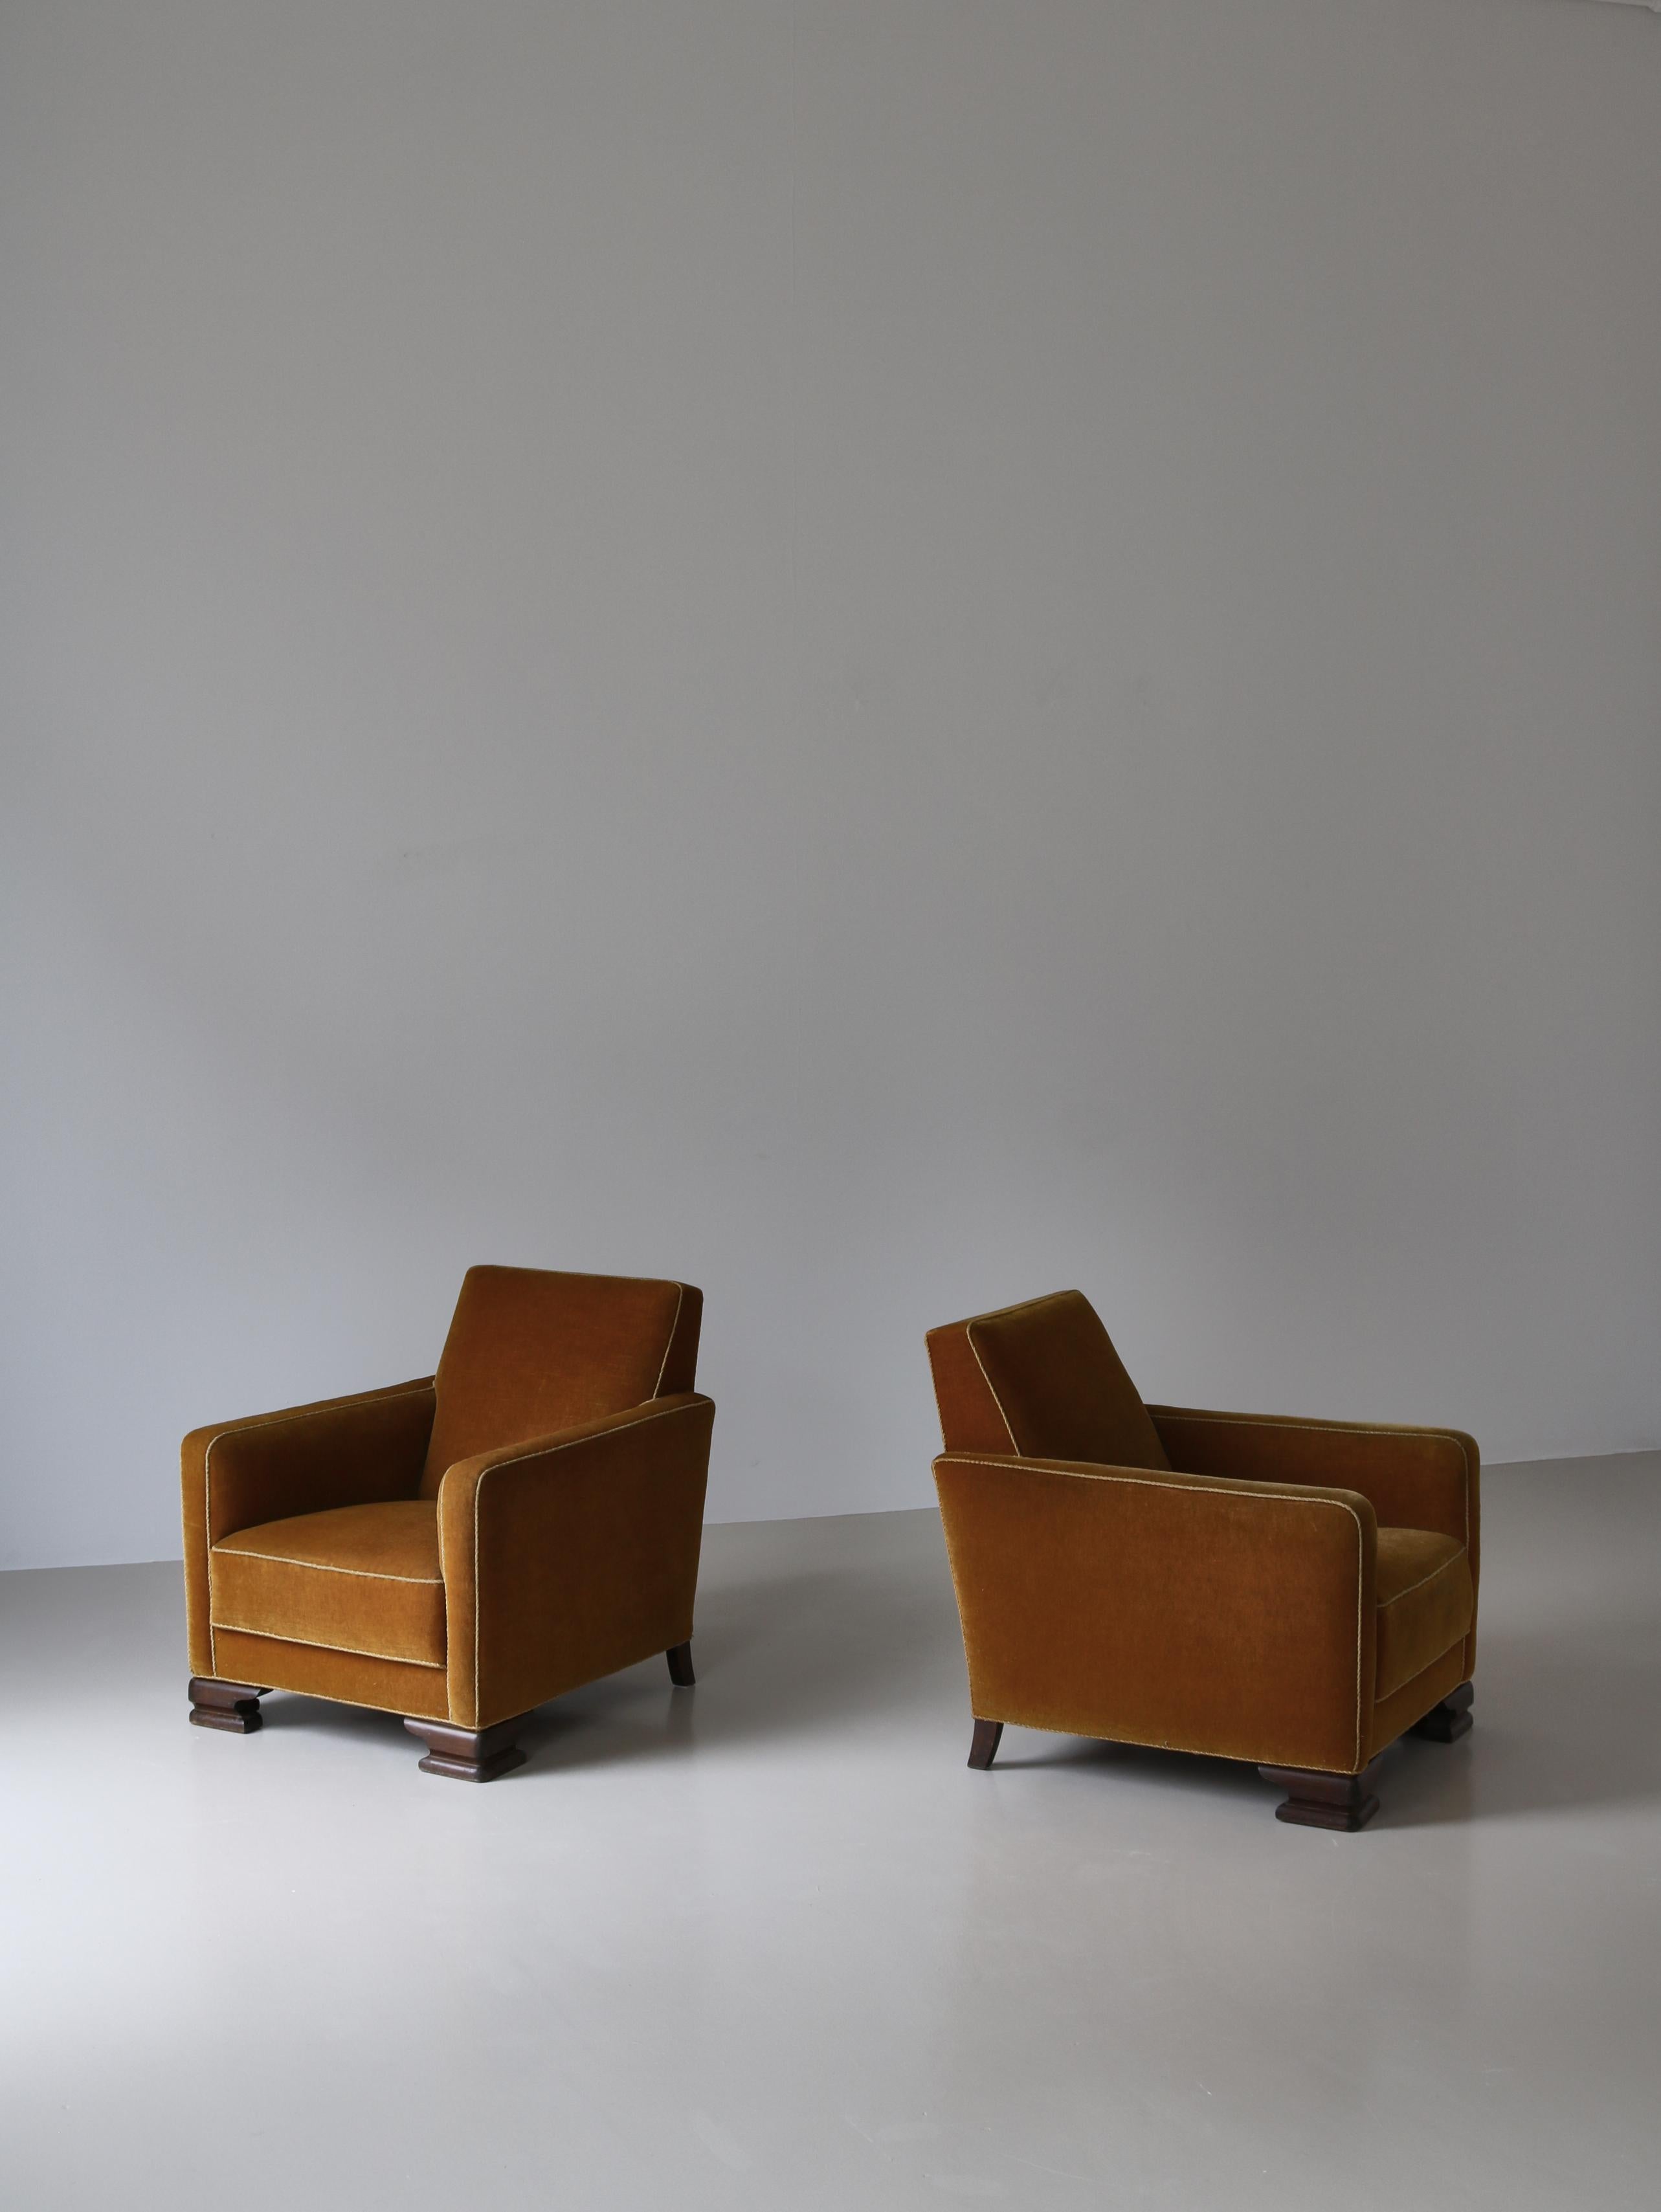 Pair of Danish Cabinetmaker Art Deco Lounge Chairs in Yellow Mohair, 1930s For Sale 14